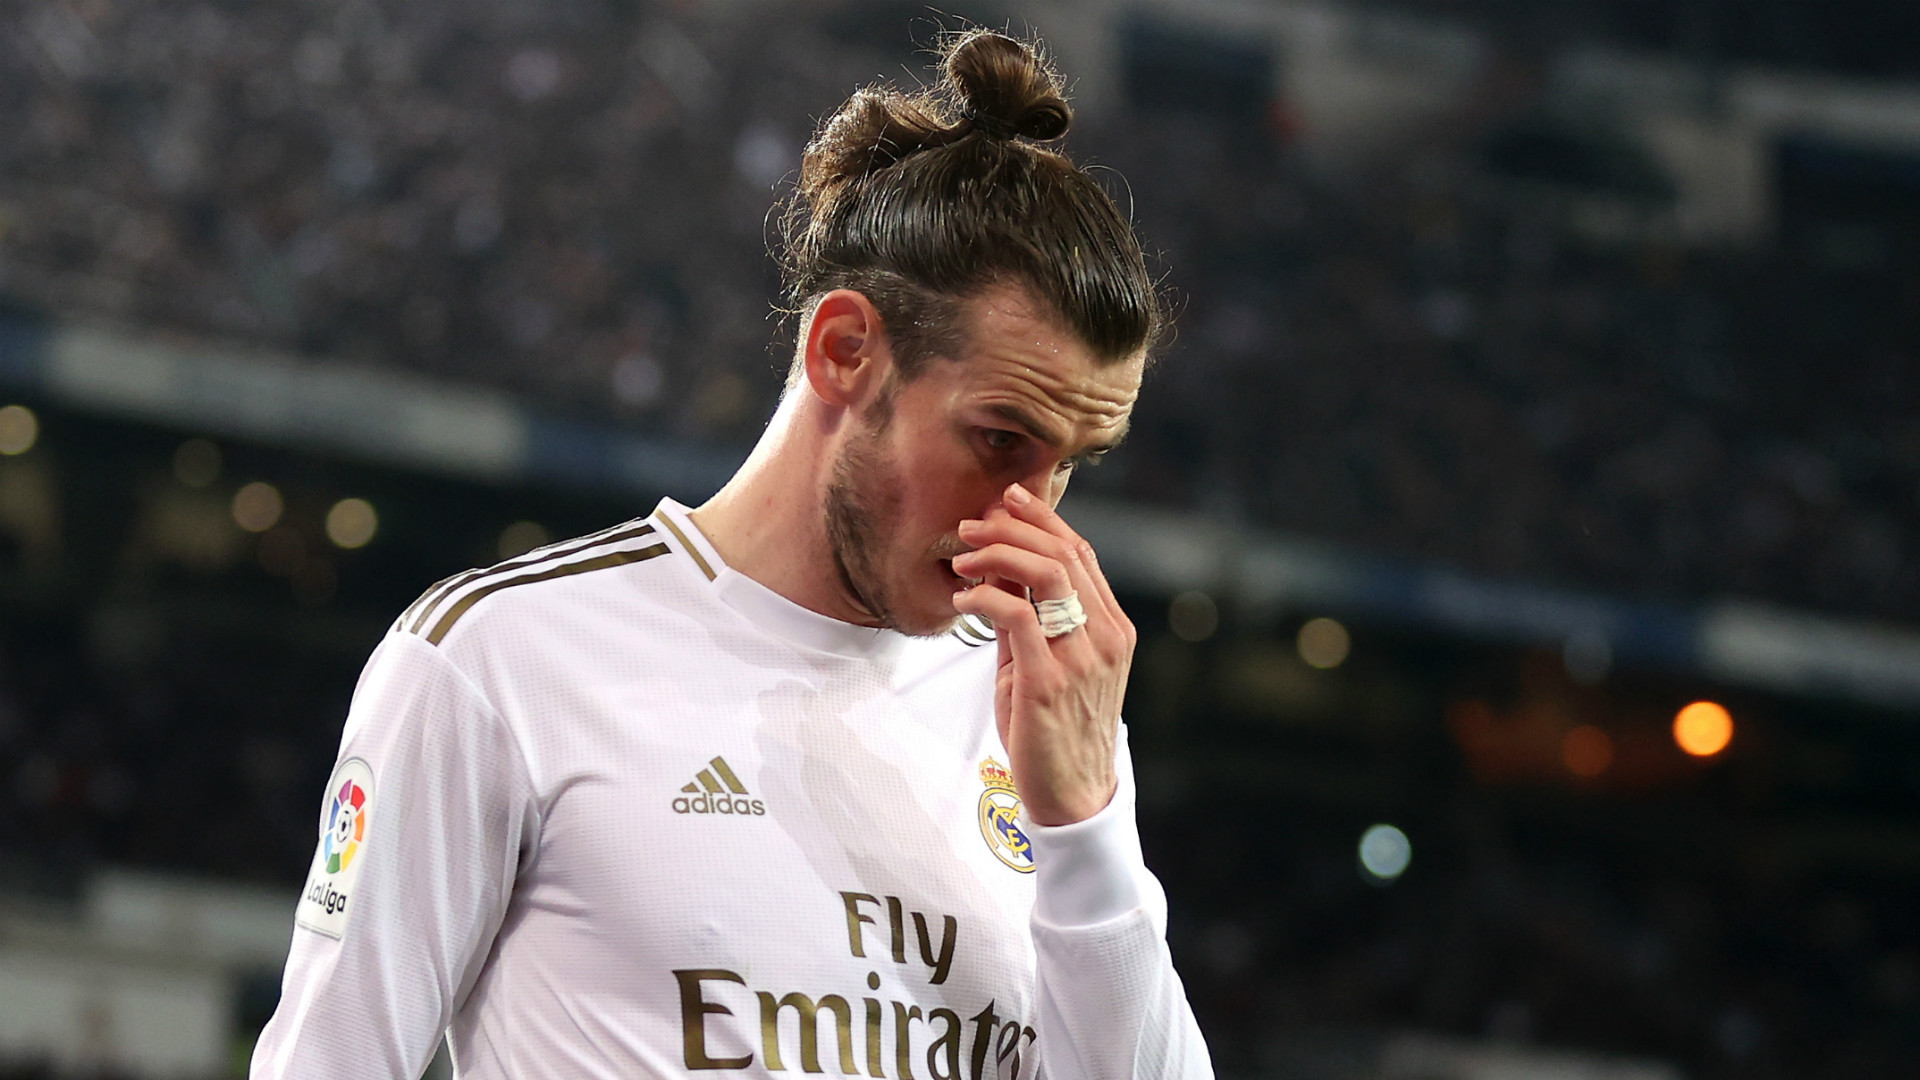 Bale reacts to whistles at Real Madrid as Spursâ€™ returning hero says he has no regrets